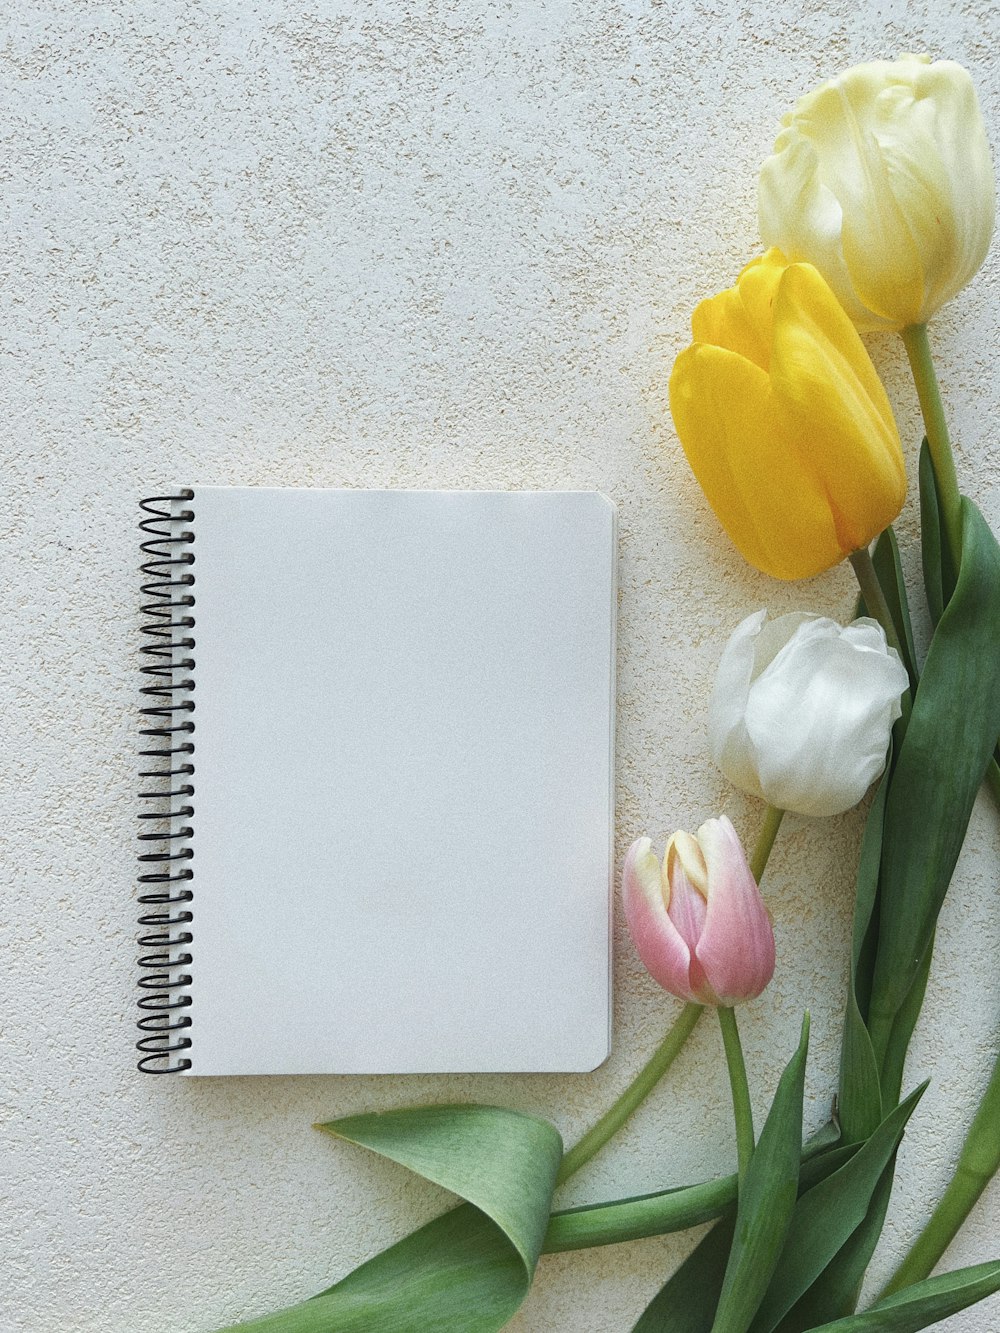 a notebook with a blank page next to tulips